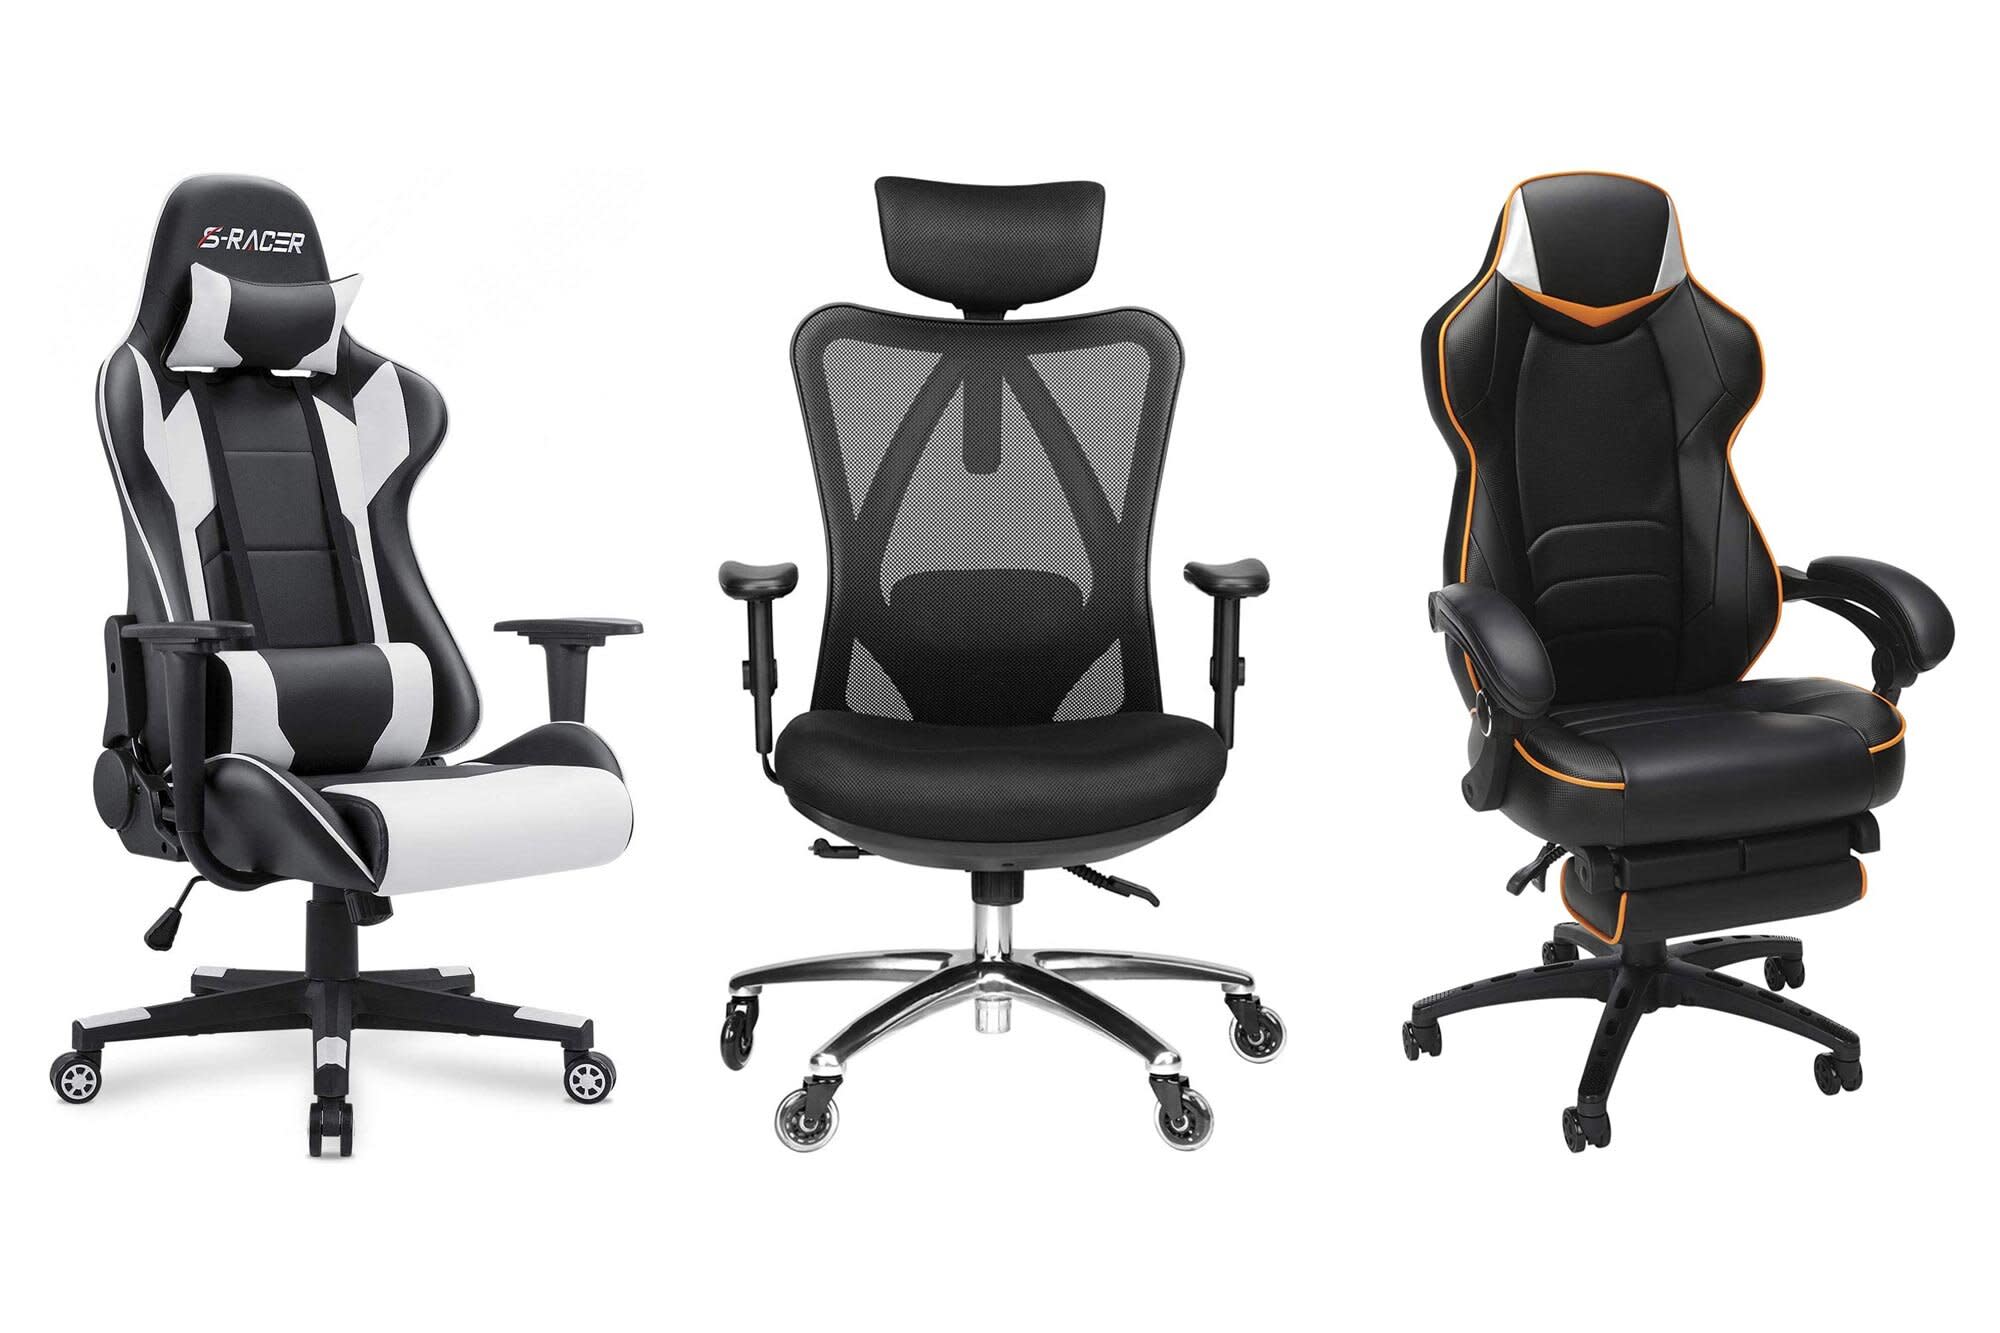 The 9 most comfortable gaming chairs